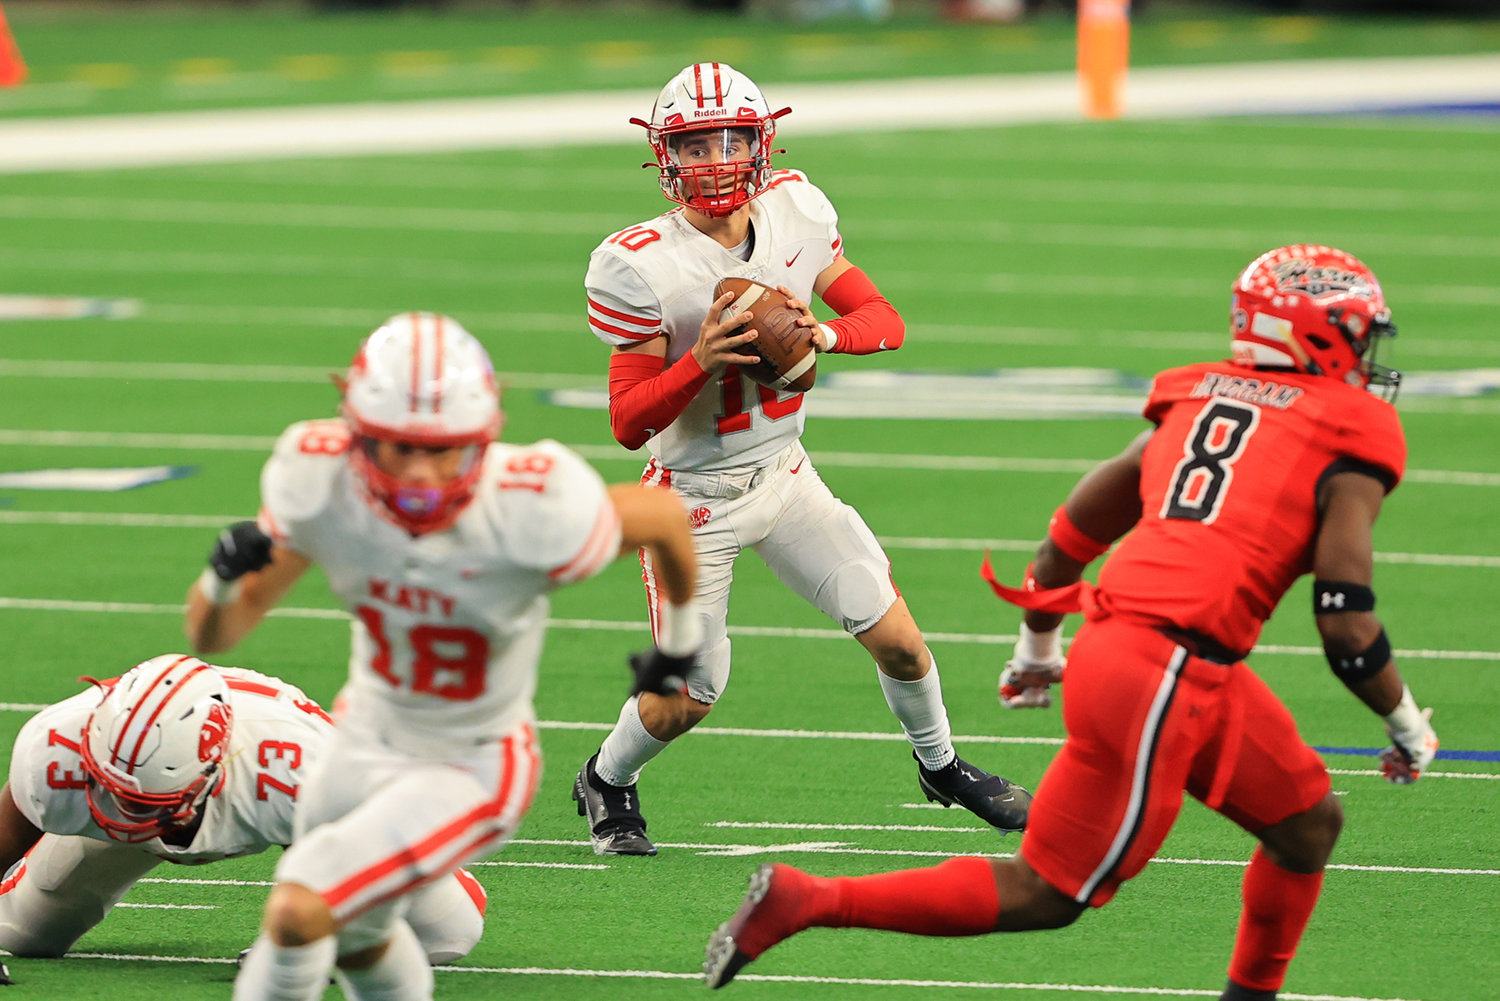 Katy sophomore quarterback Caleb Koger looks downfield during the first half of the Tigers' 51-14 win over Cedar Hill at AT&T Stadium on Saturday afternoon. Katy won the Class 6A-Division II state championship.